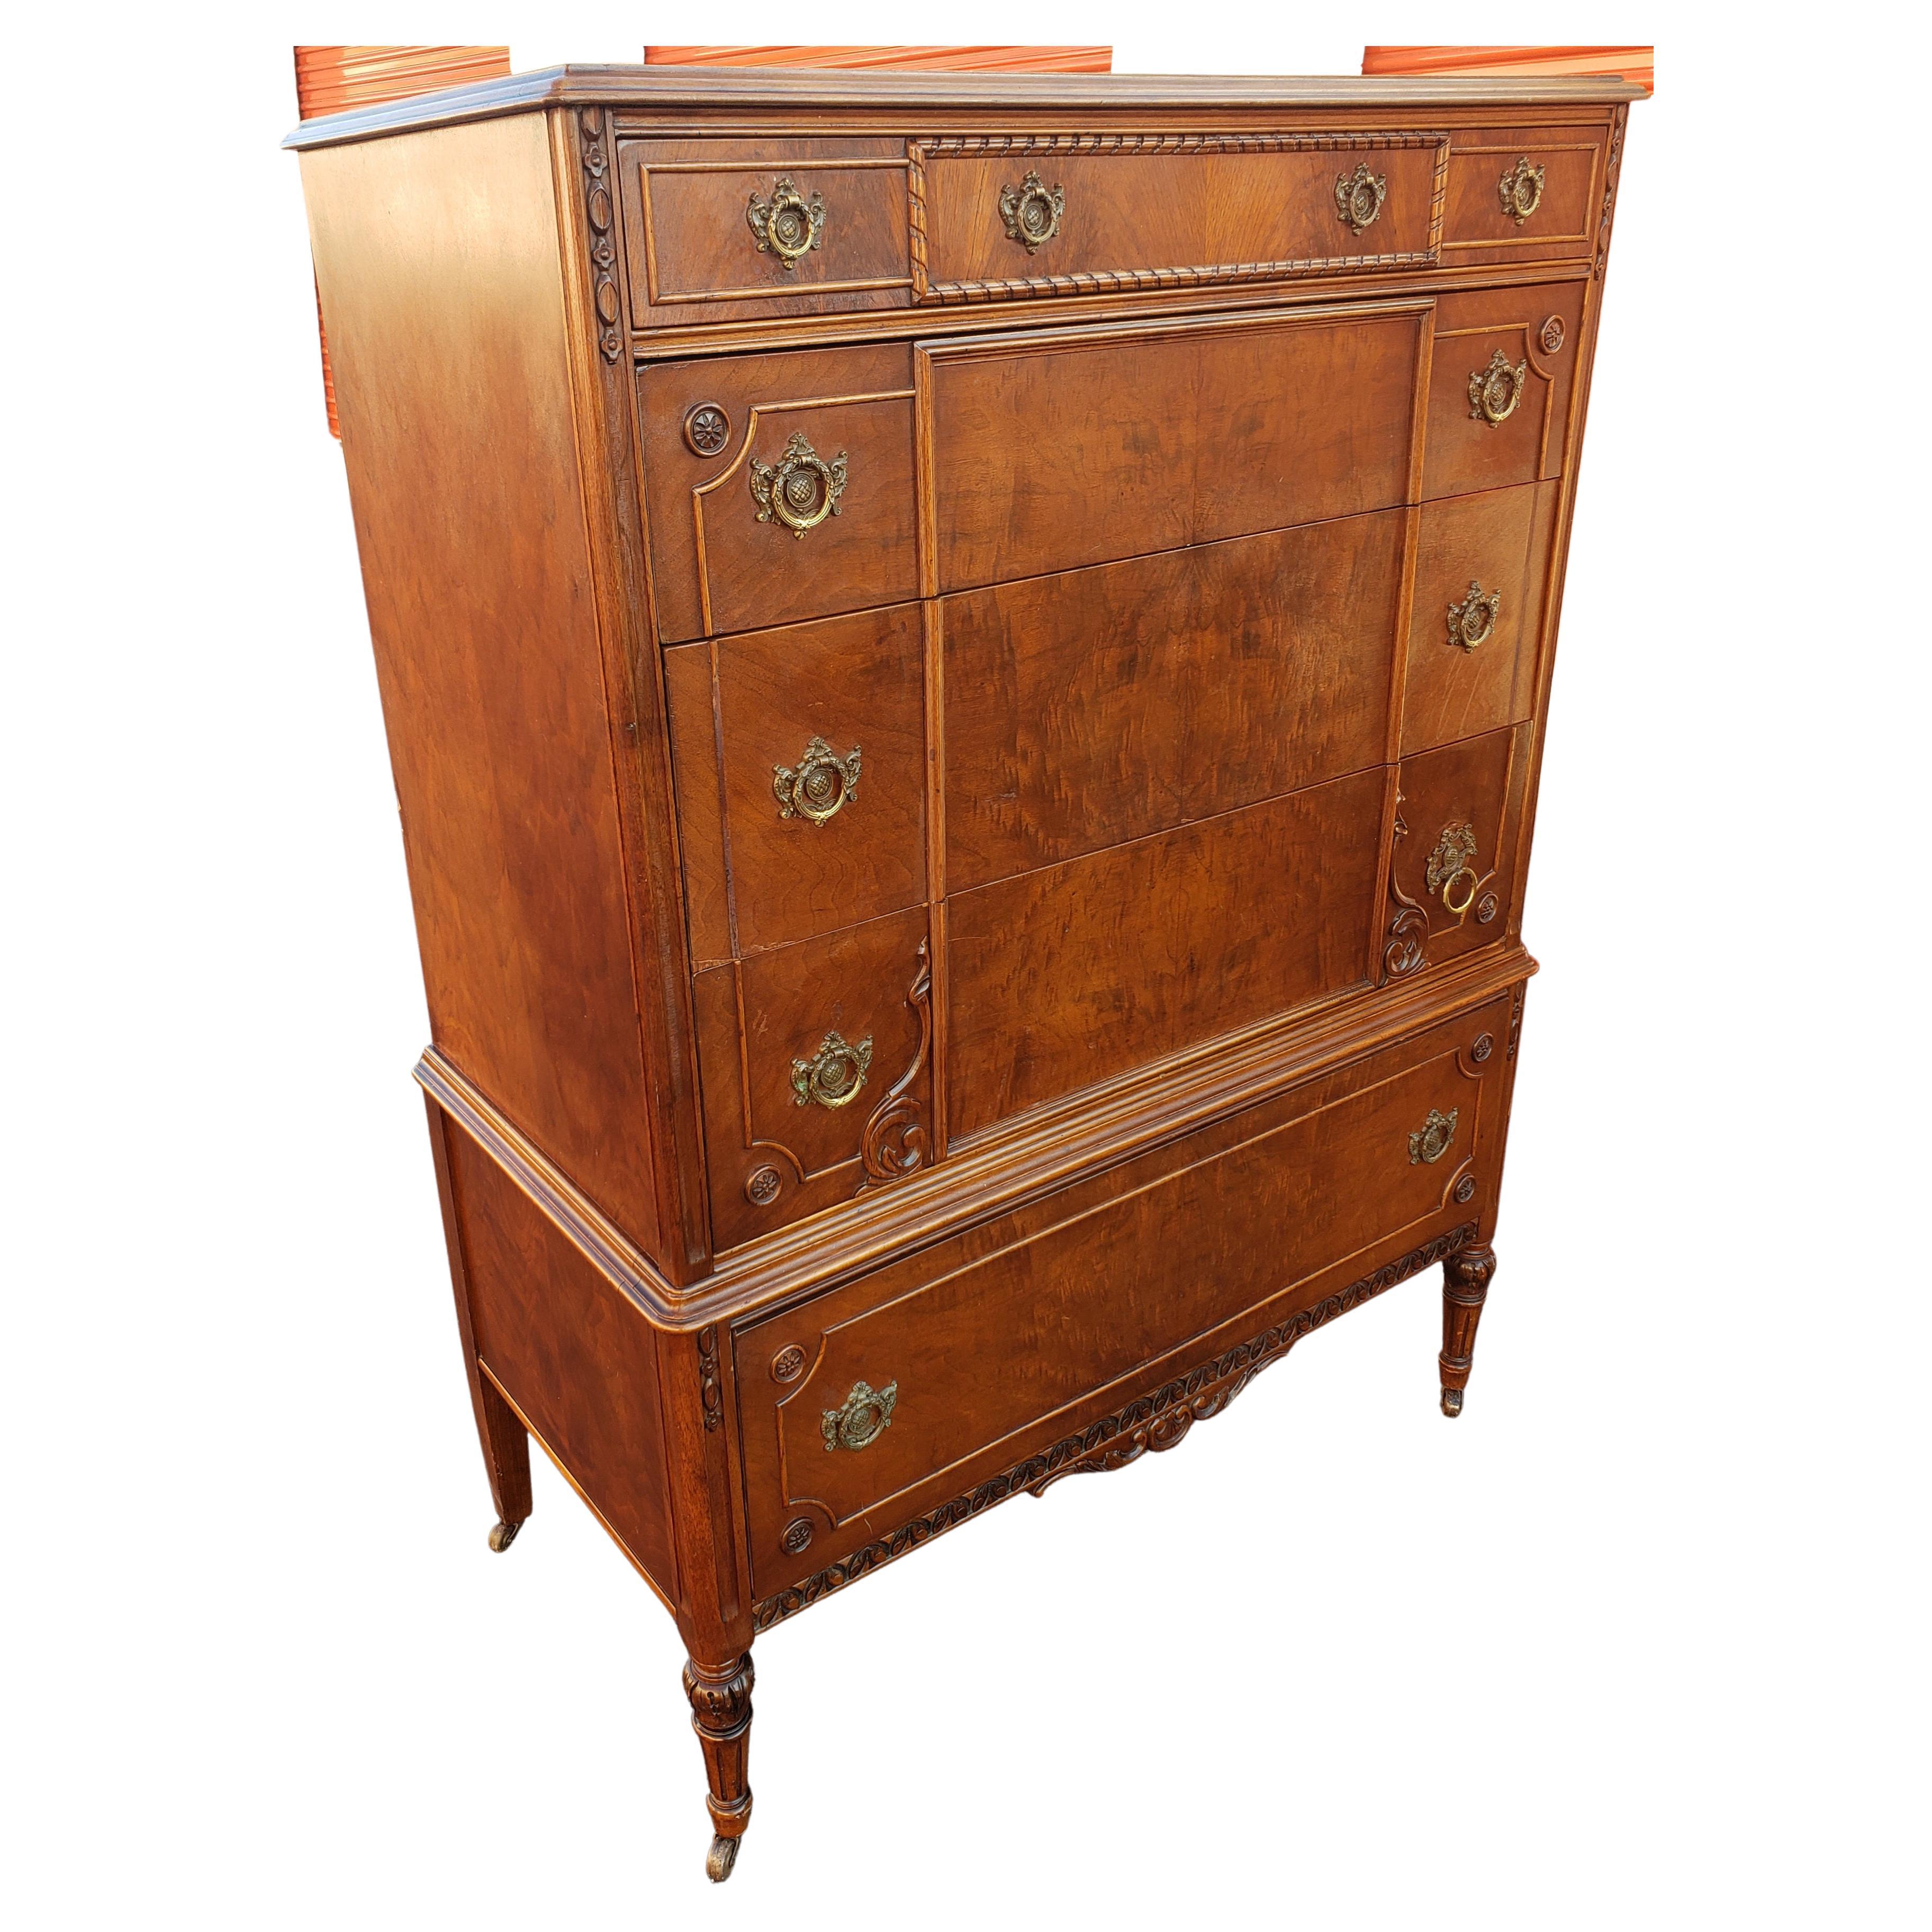 Part of a 8 Piece Bedroom Set by the very reputable Phenix Furniture Co, Warren Pa. Very well made. Quality construction with dovetail finish & wood divided drawers.
This is an antique renaissance style French chest of Drawers with an integrated